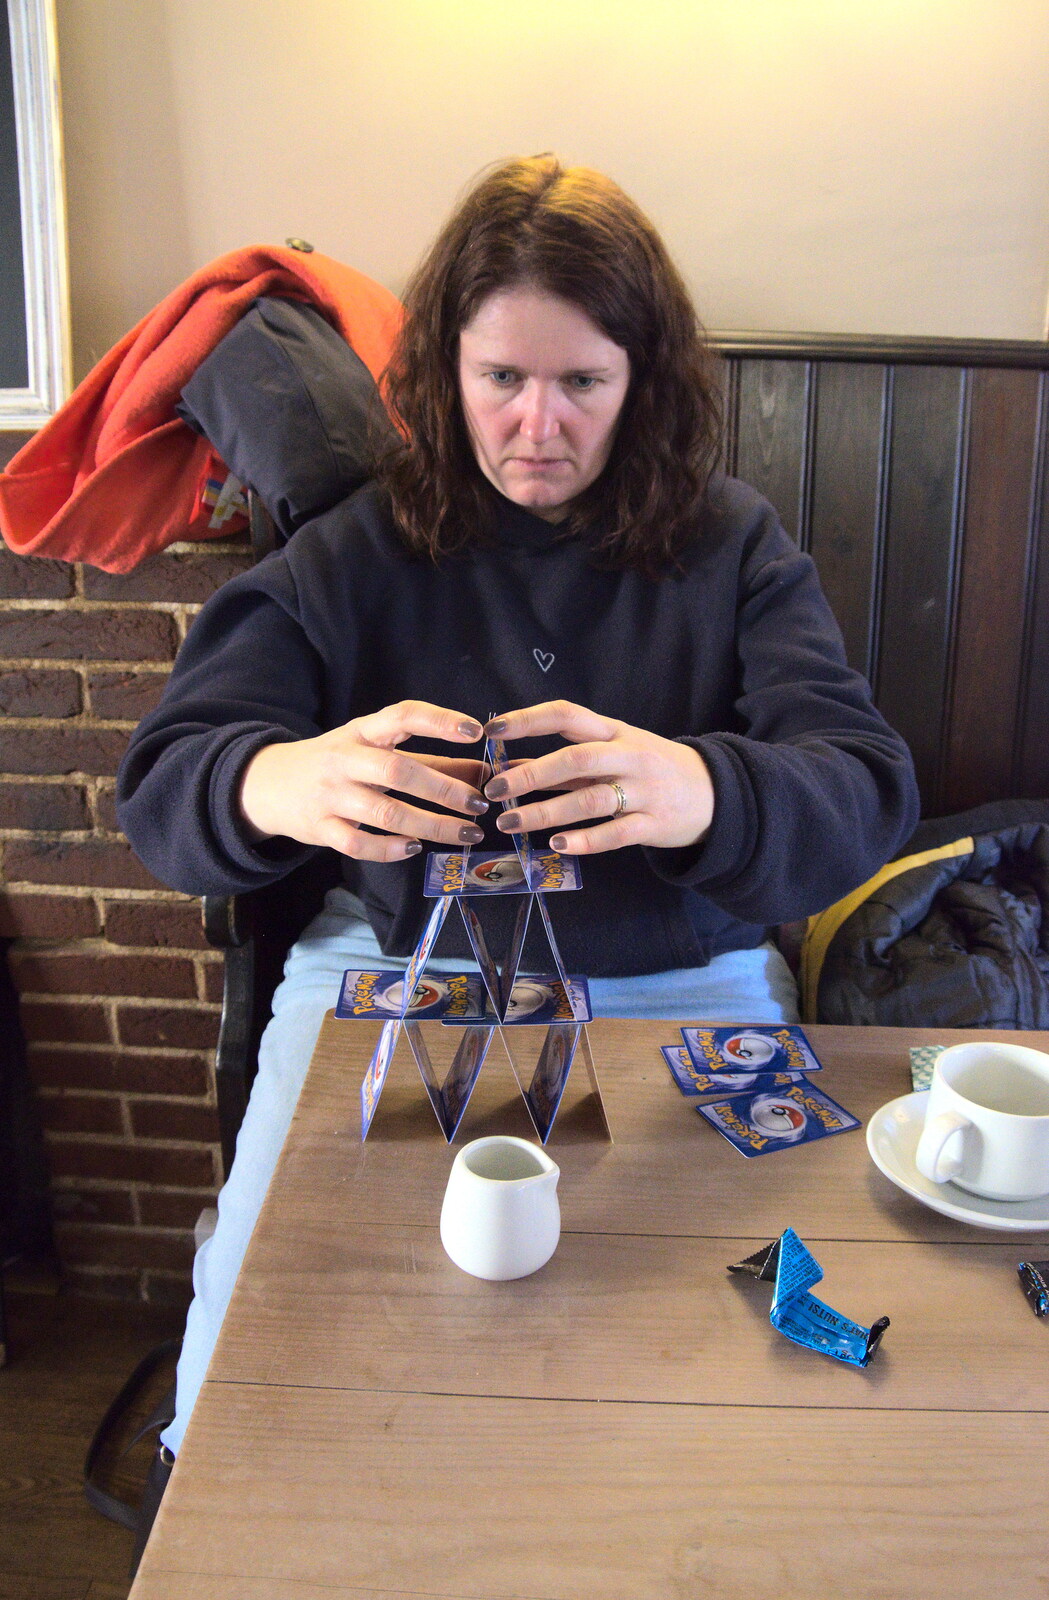 Isobel has a go too from A Trip to Orford Castle, Orford, Suffolk - 26th February 2022